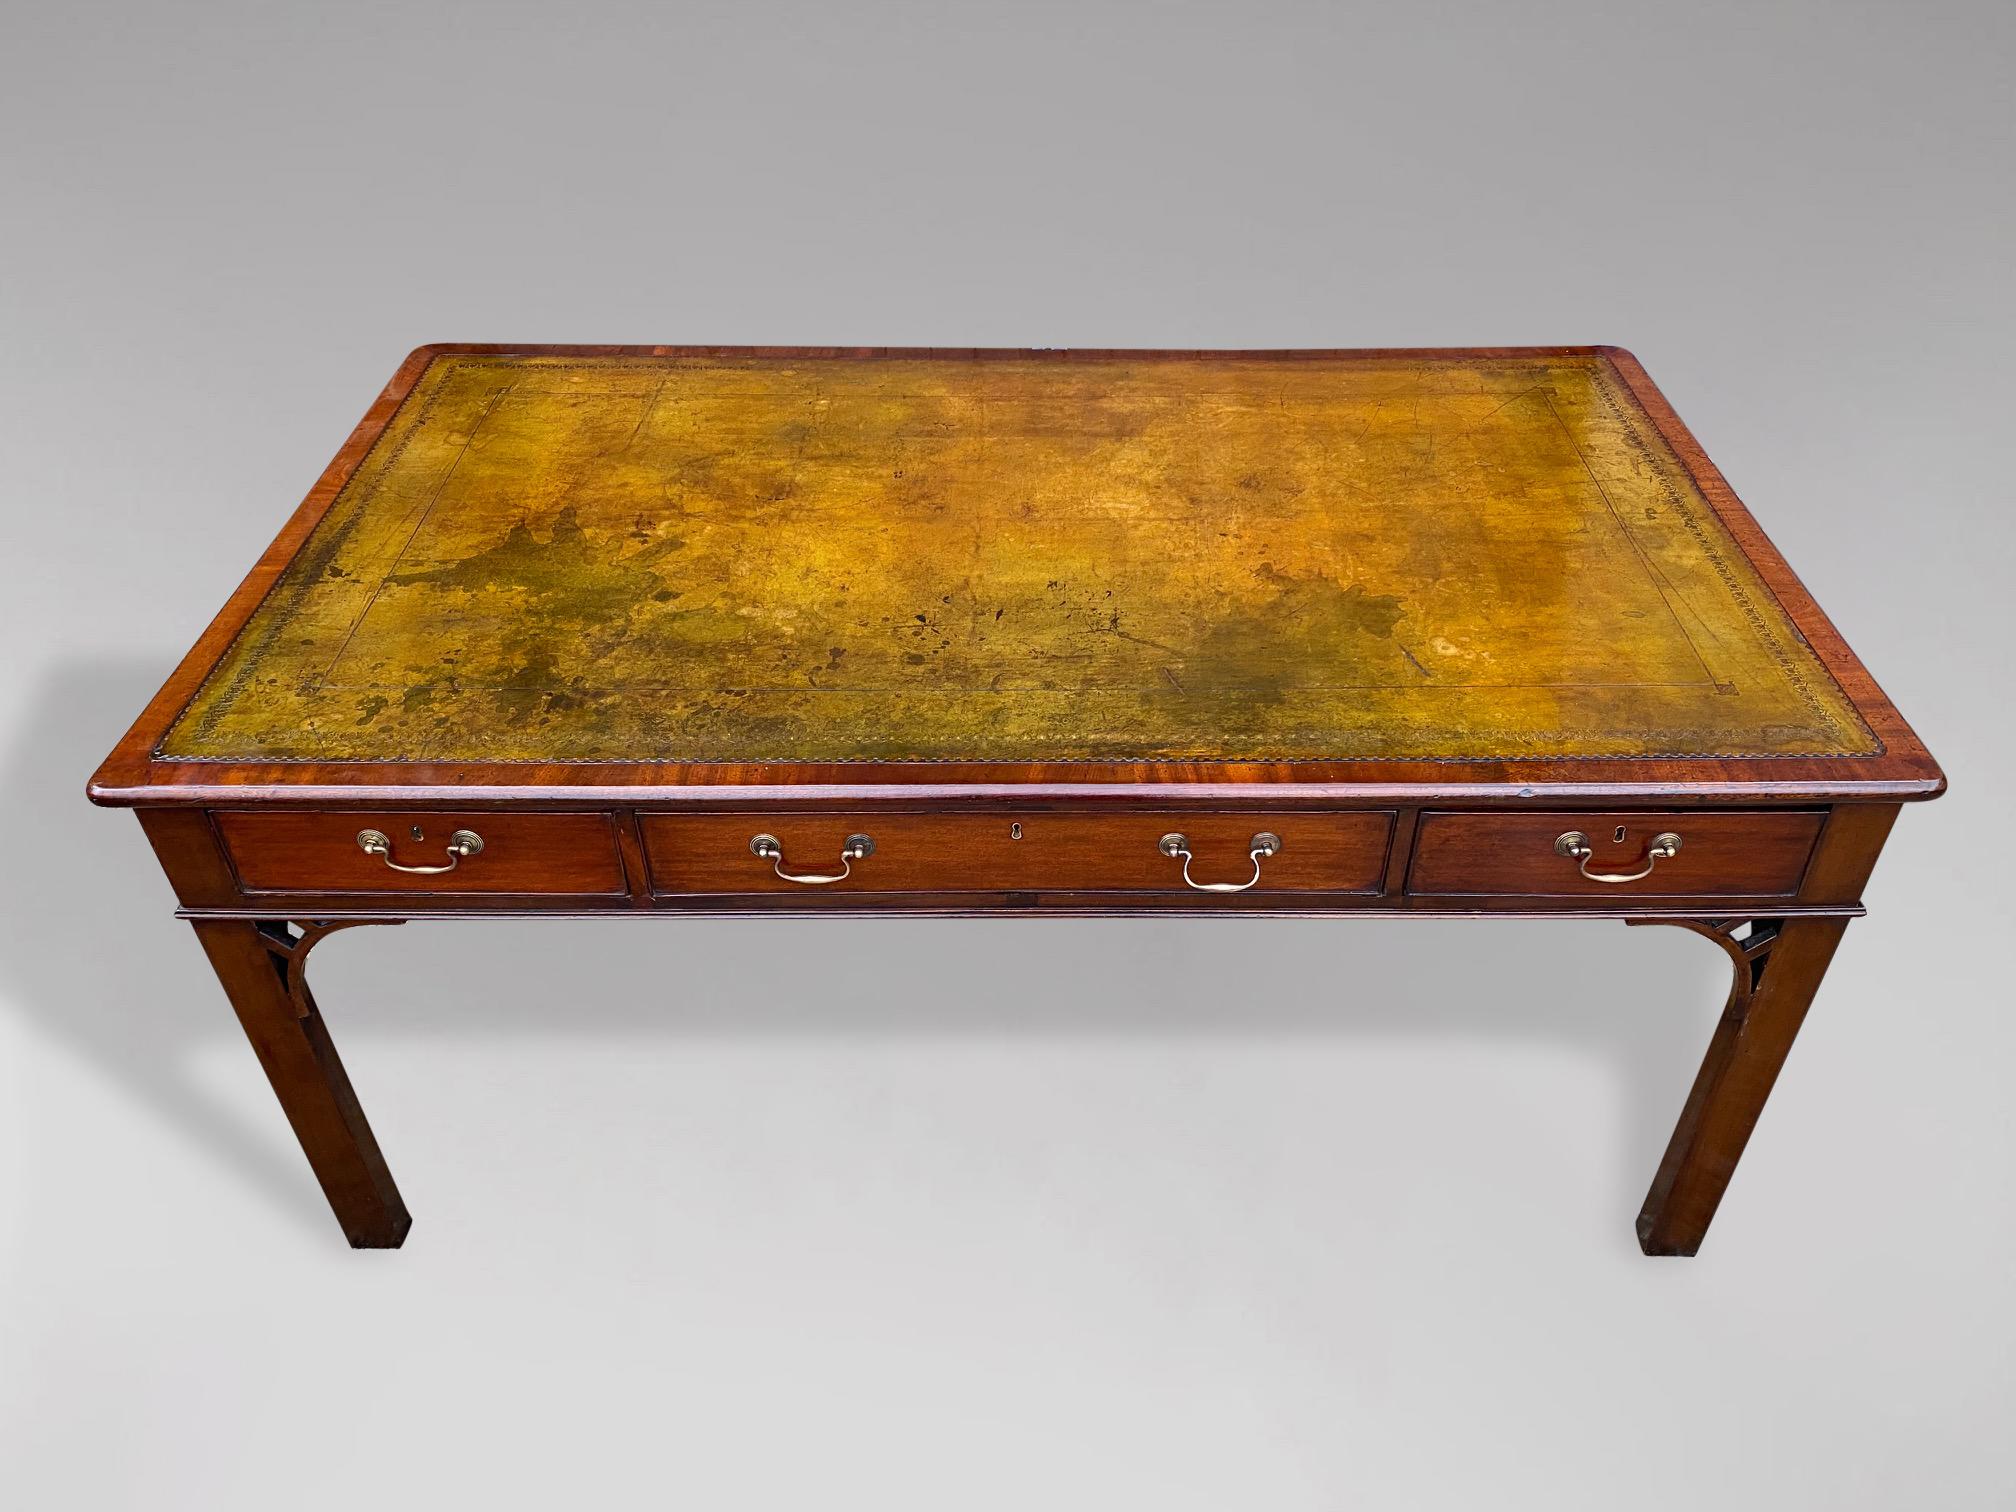 A large fine early 19th century, George III period mahogany partners library writing table. The rounded moulded rectangular top with superb quality light gold green tooled leather inset top above 6 oak lined drawers with the original brass swan neck